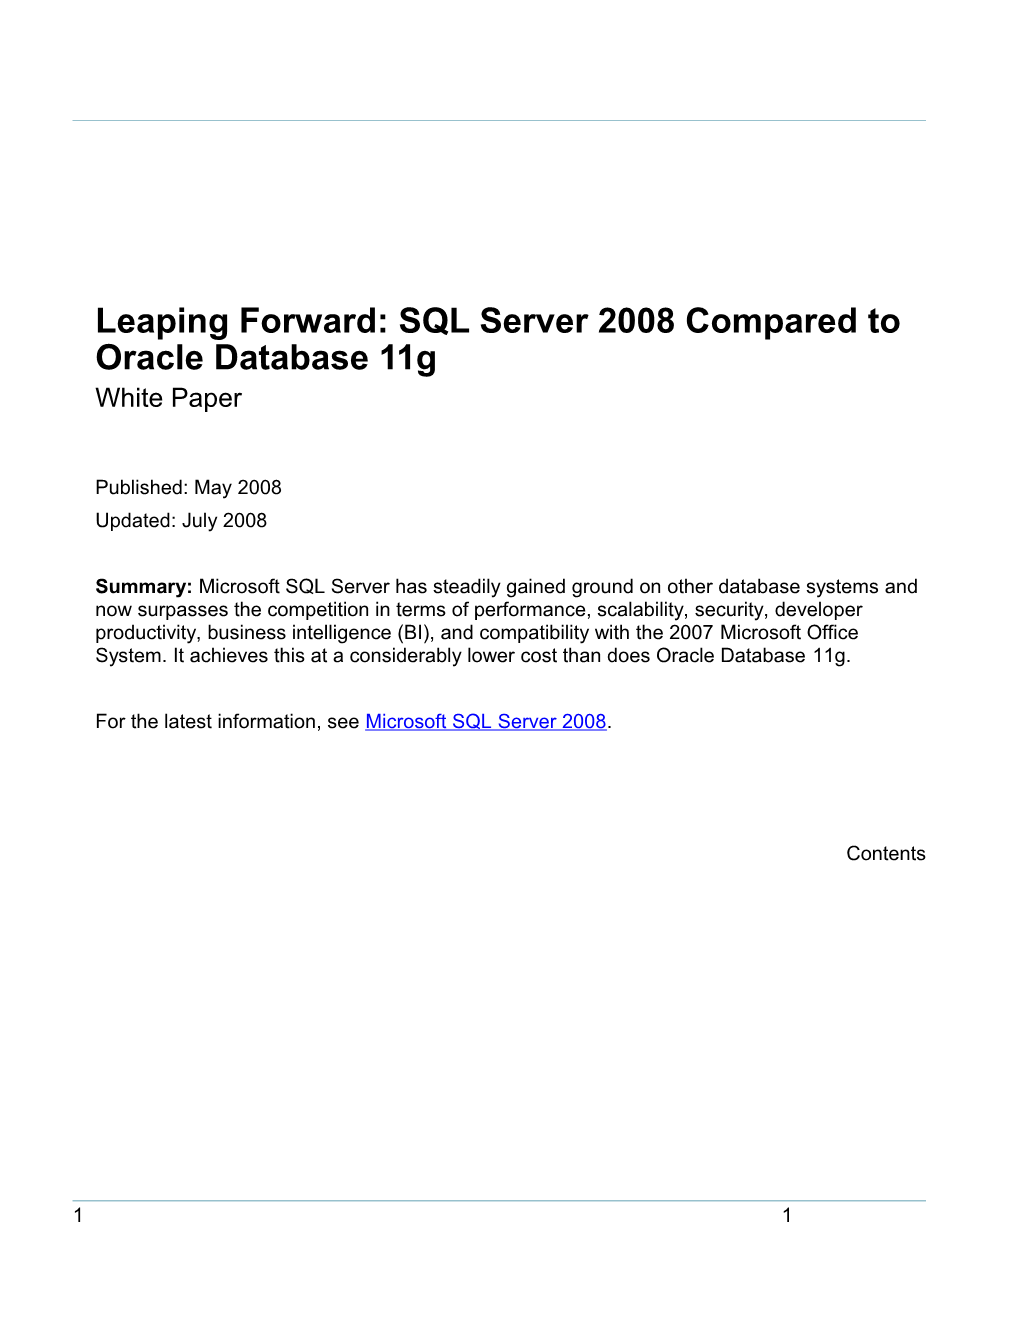 Leaping Forward: SQL Server 2008 Compared to Oracle Database 11G